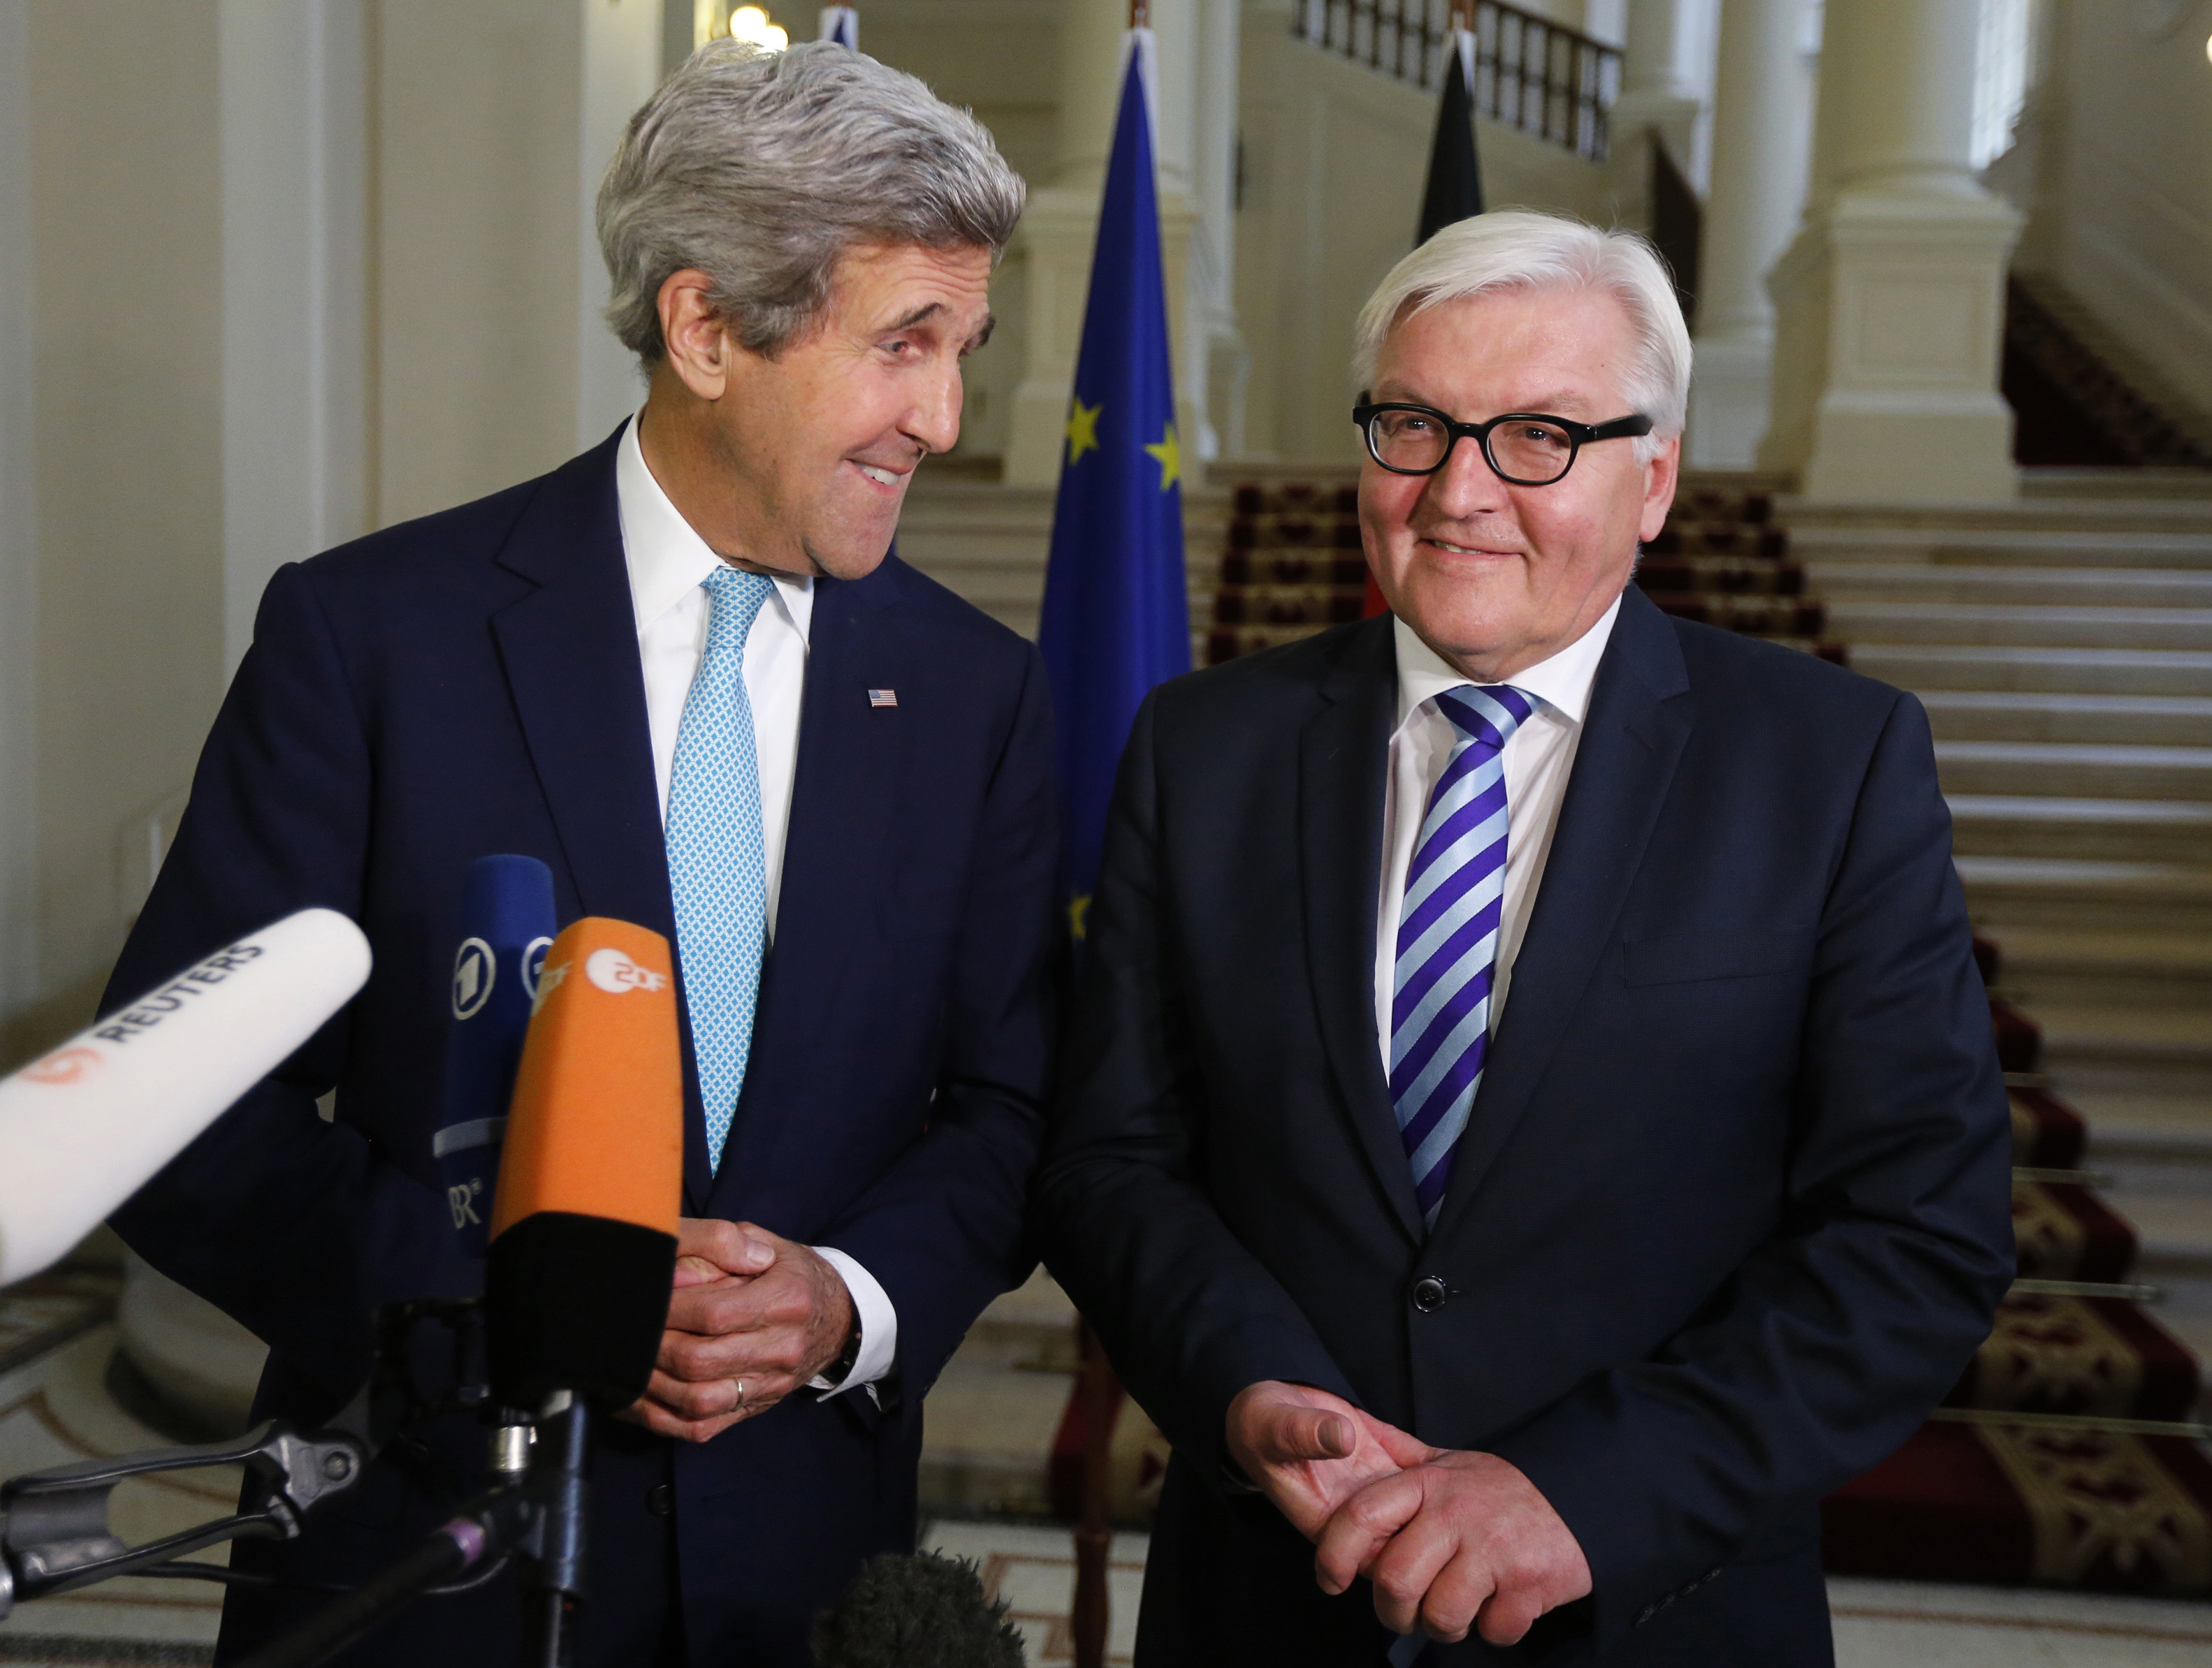 U.S. Secretary of State John Kerry, left and German Foreign Minister Frank-Walter Steinmeier during a press conference, after talks between the foreign ministers of the six powers negotiating with Tehran on its nuclear program, in Vienna, Austria on July 13, 2014. (Jim Bourg—AP)